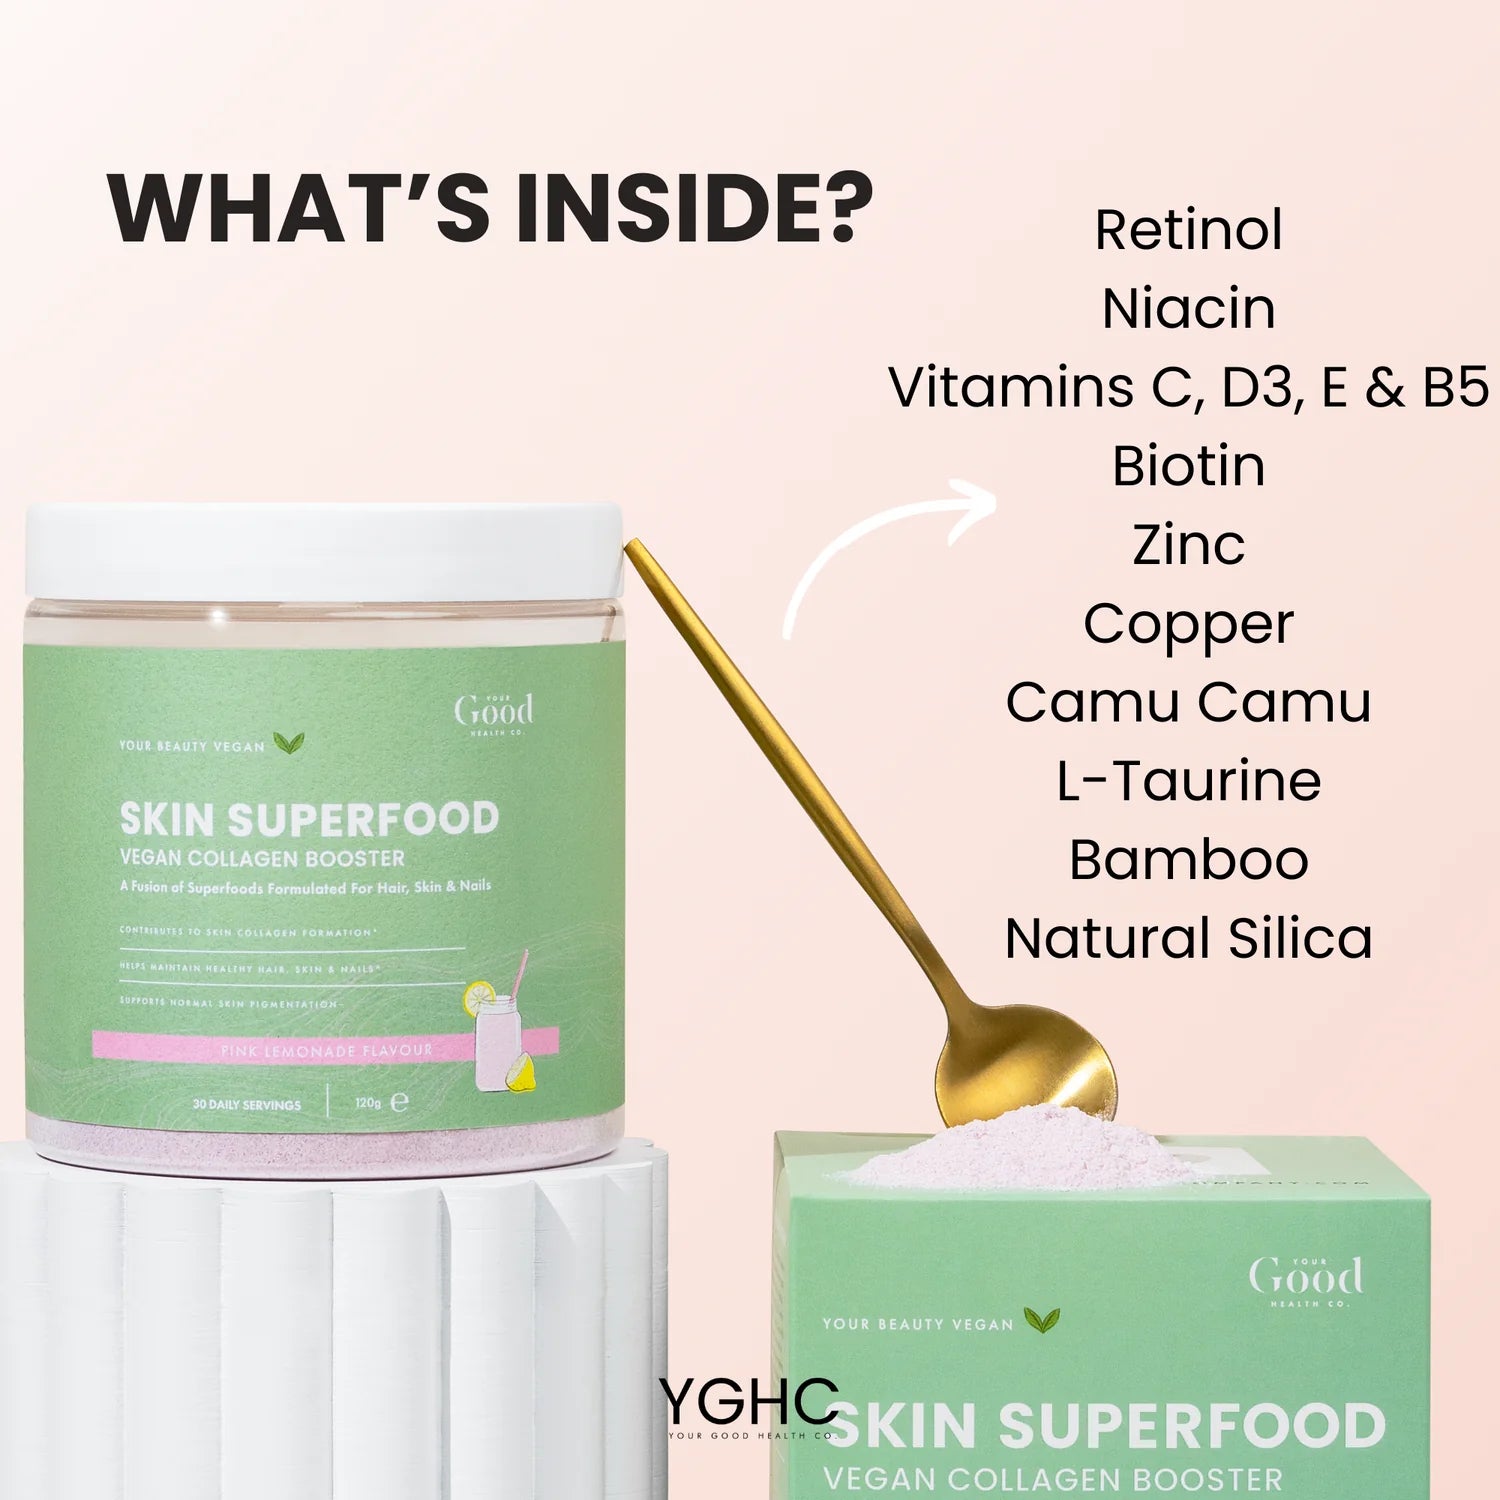 90 Day Skin Superfood